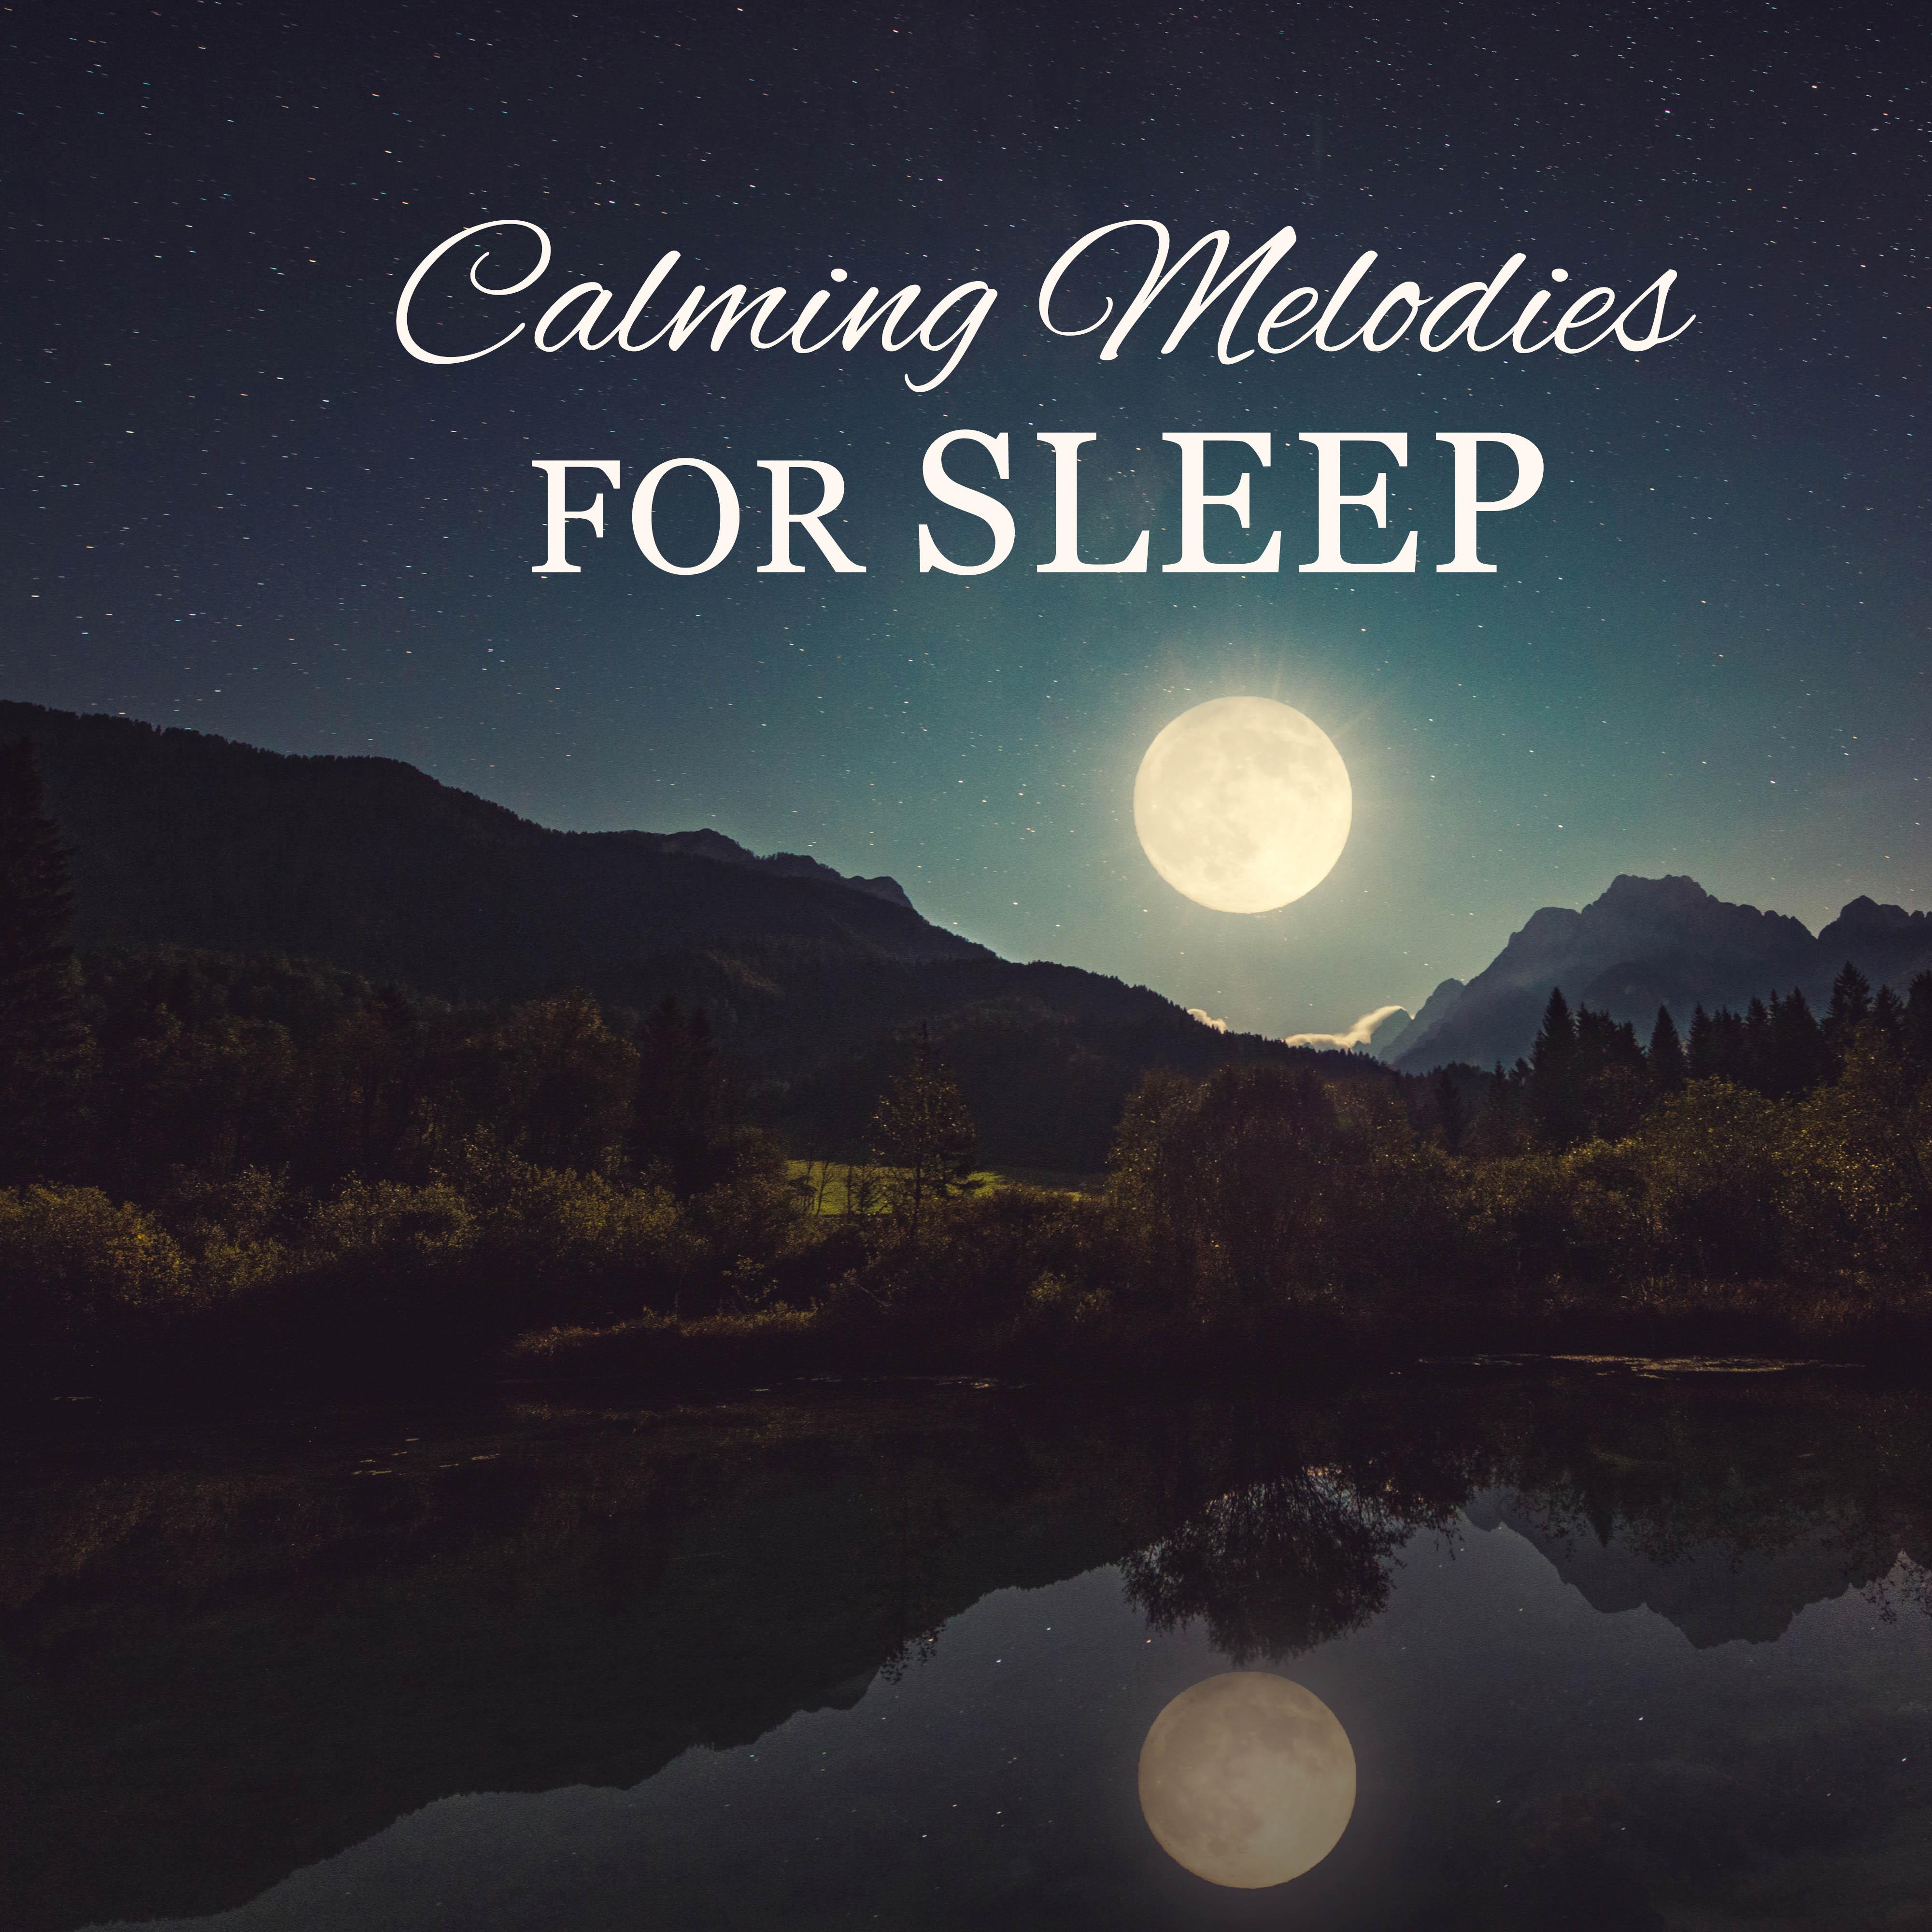 Calming Melodies for Sleep  Classical Music for Sleep, Rest, Bedtime, Music to Pillow